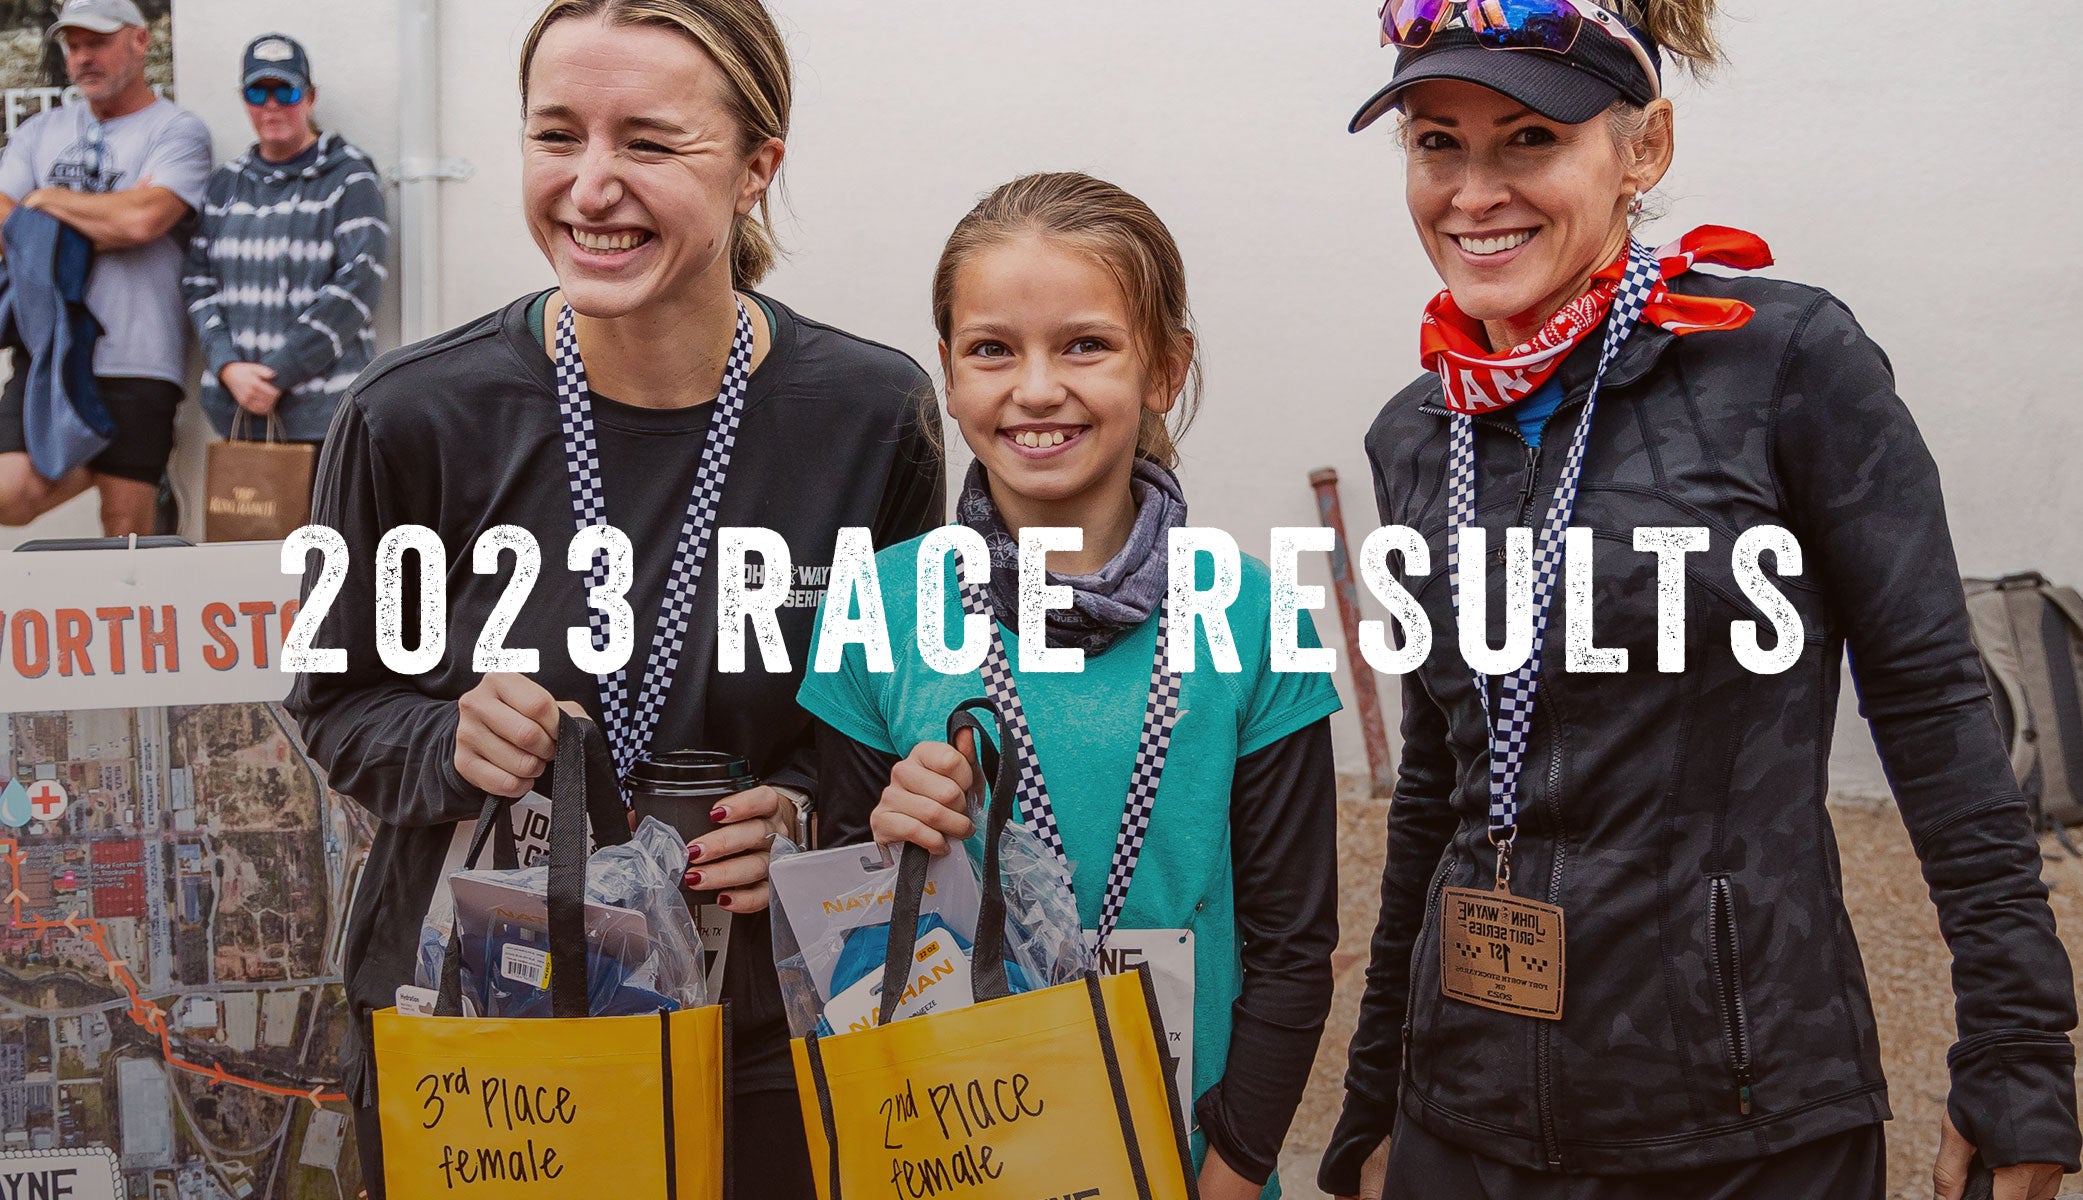 JWGS_Button_FW_2023_RaceResults.jpg__PID:1c2e9581-e189-438a-83c9-ce80a1b01f14